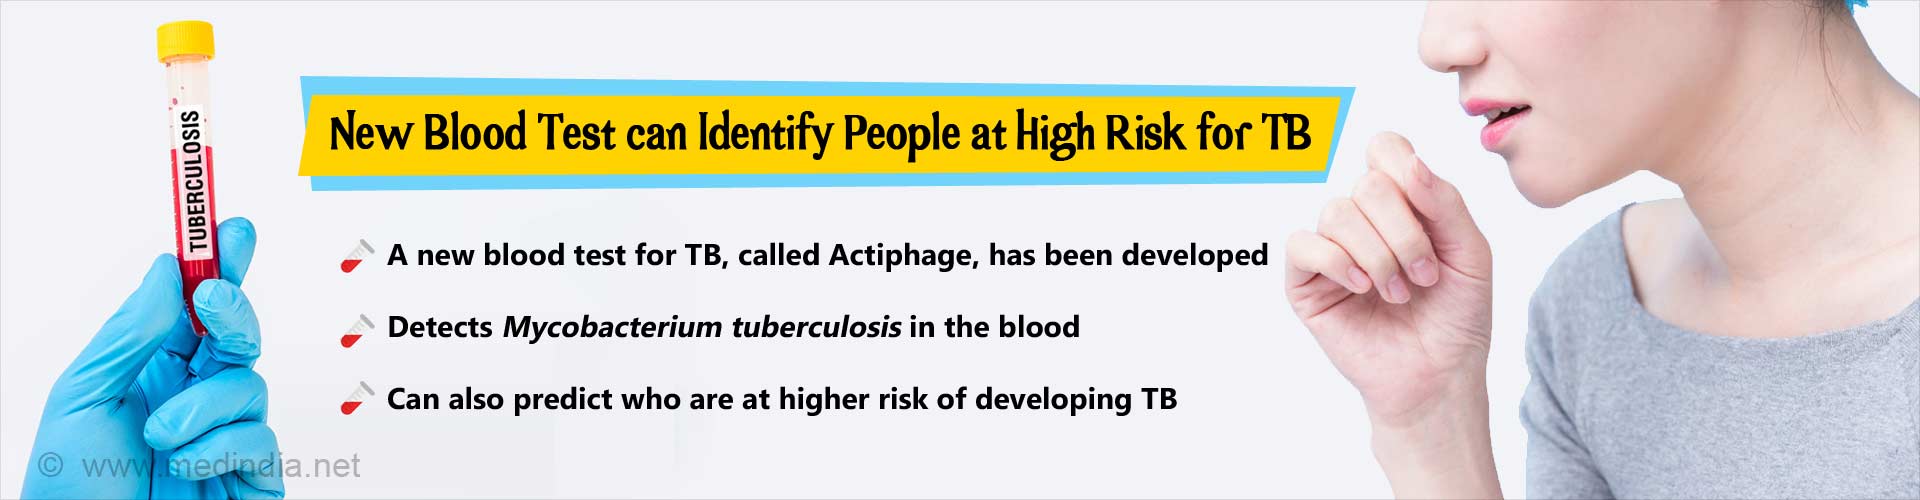 New blood test can identify people at high risk for TB. A new blood test for TB, called Actiphage, has been developed. Detects Mycobacterium tuberculosis in the blood. Can also predict who are at higher risk of developing TB.